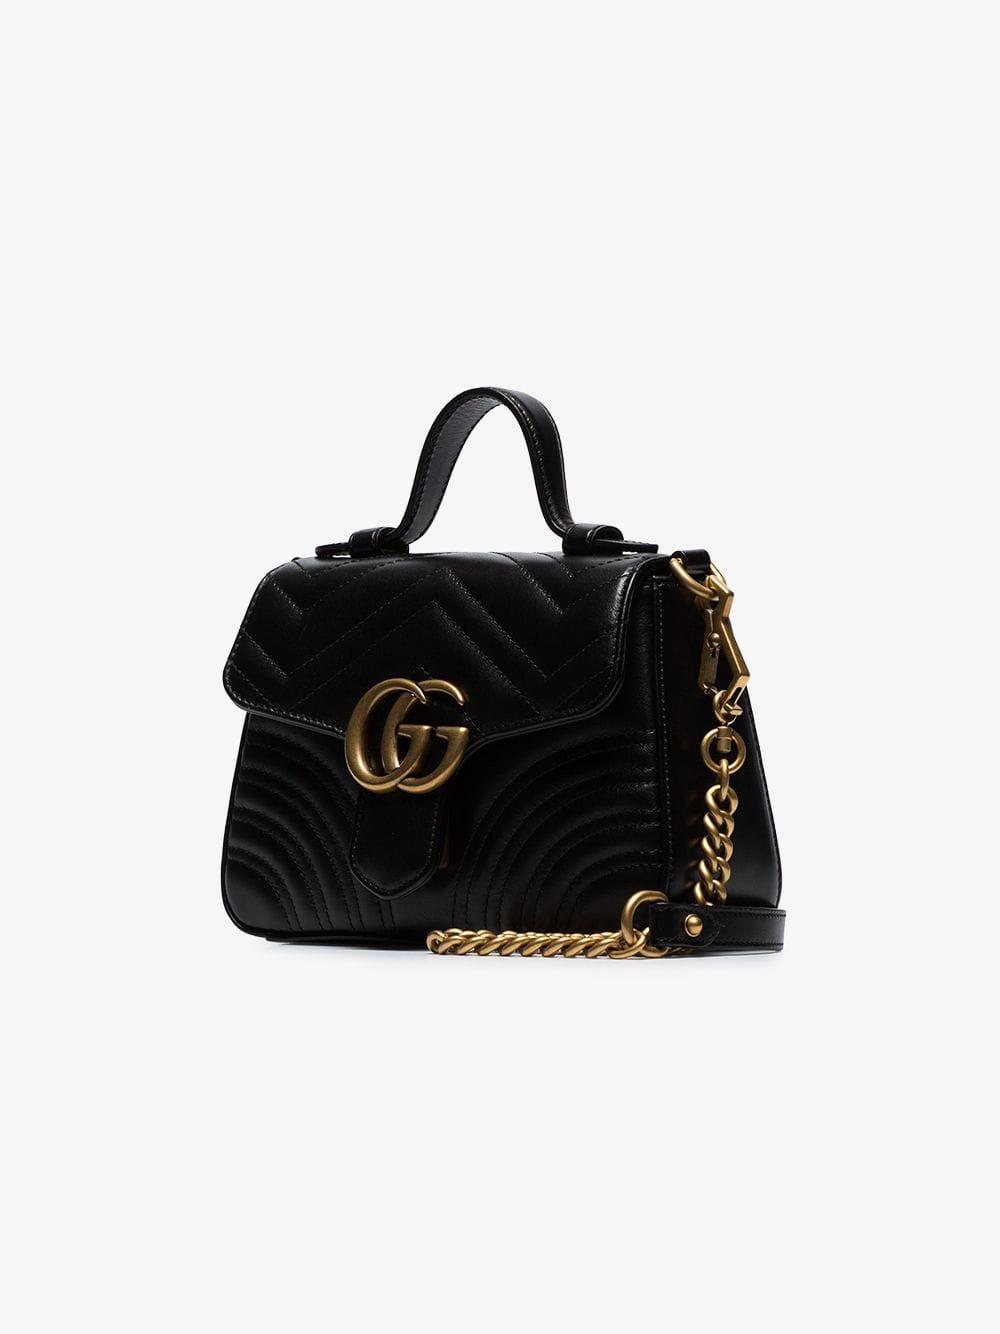 Gucci Black Marmont Mini Quilted Leather Shoulder Bag - Lyst